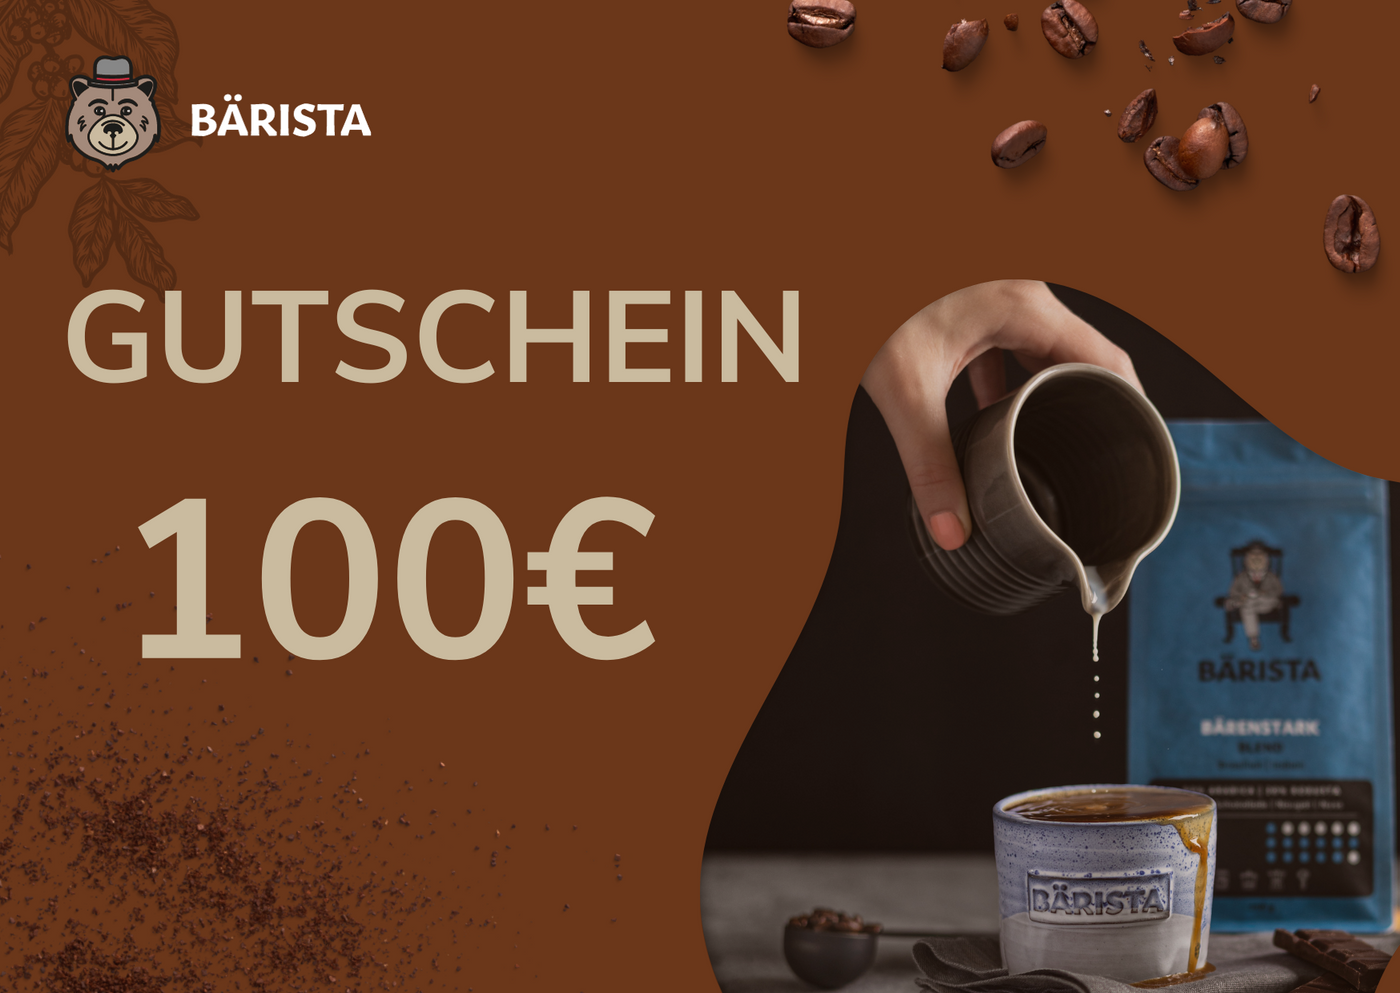 Bärista gift vouchers – the perfect gift for coffee lovers